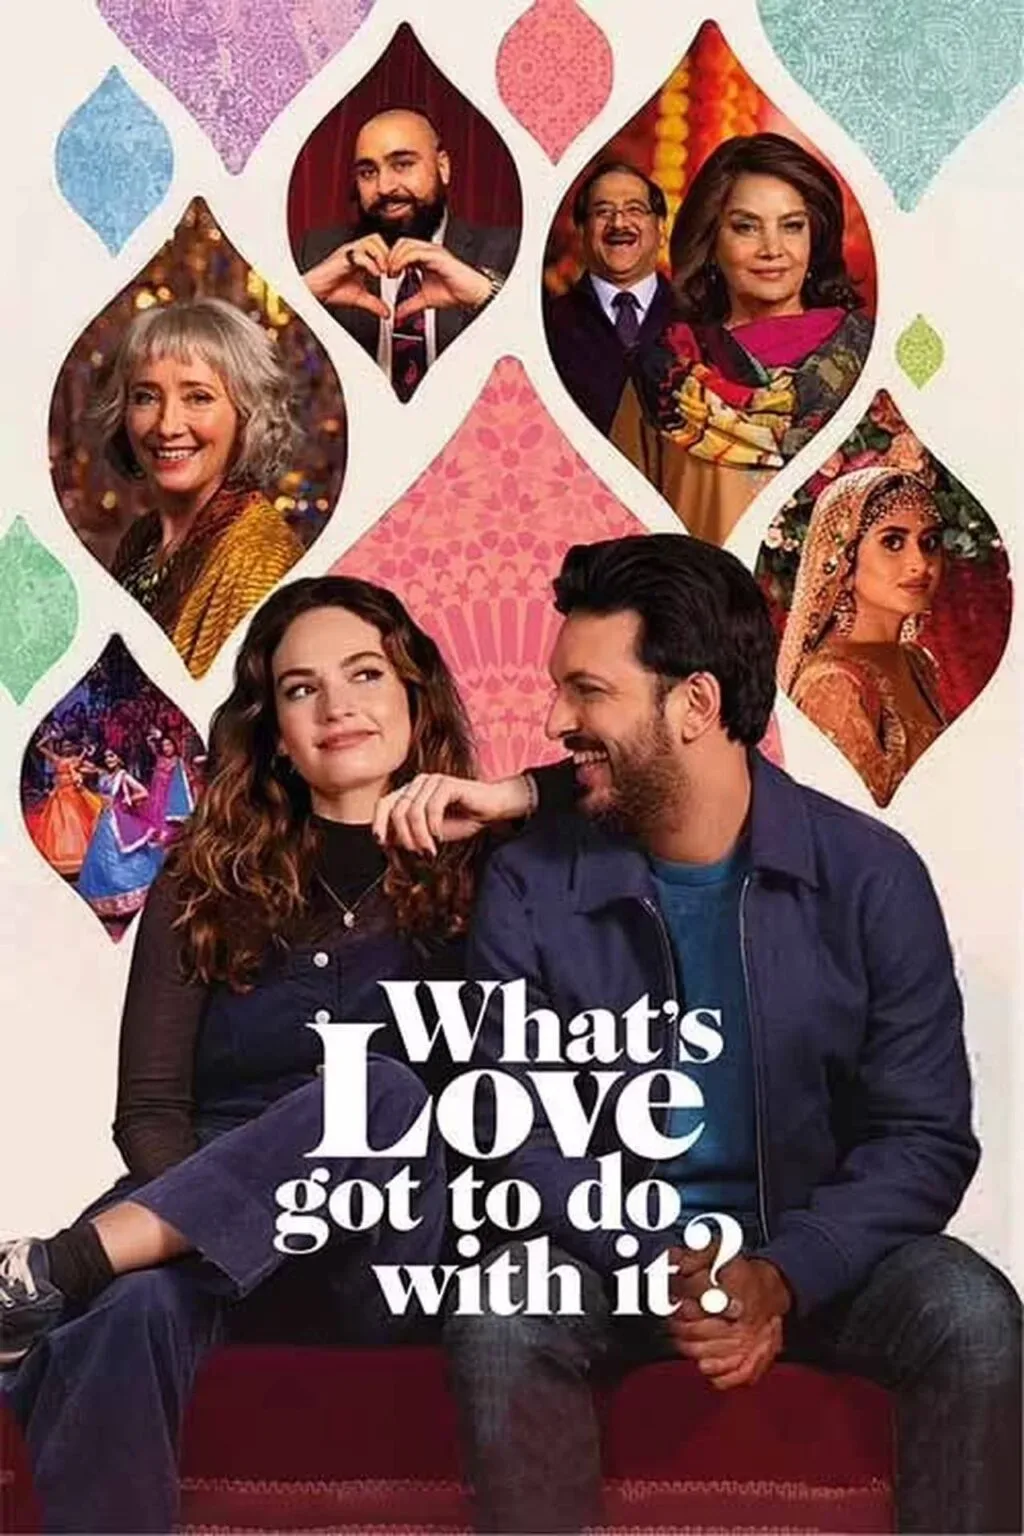 In the movie, What's Love Got to Do with It? - Zoe is a documentary filmmaker who uses a dating app that only delivers an endless stream of Mr. Wrongs. For Zoe's childhood friend and neighbor, Kaz, the answer is to follow his parents' example and opt for an arranged marriage to a bright and beautiful bride from Pakistan.